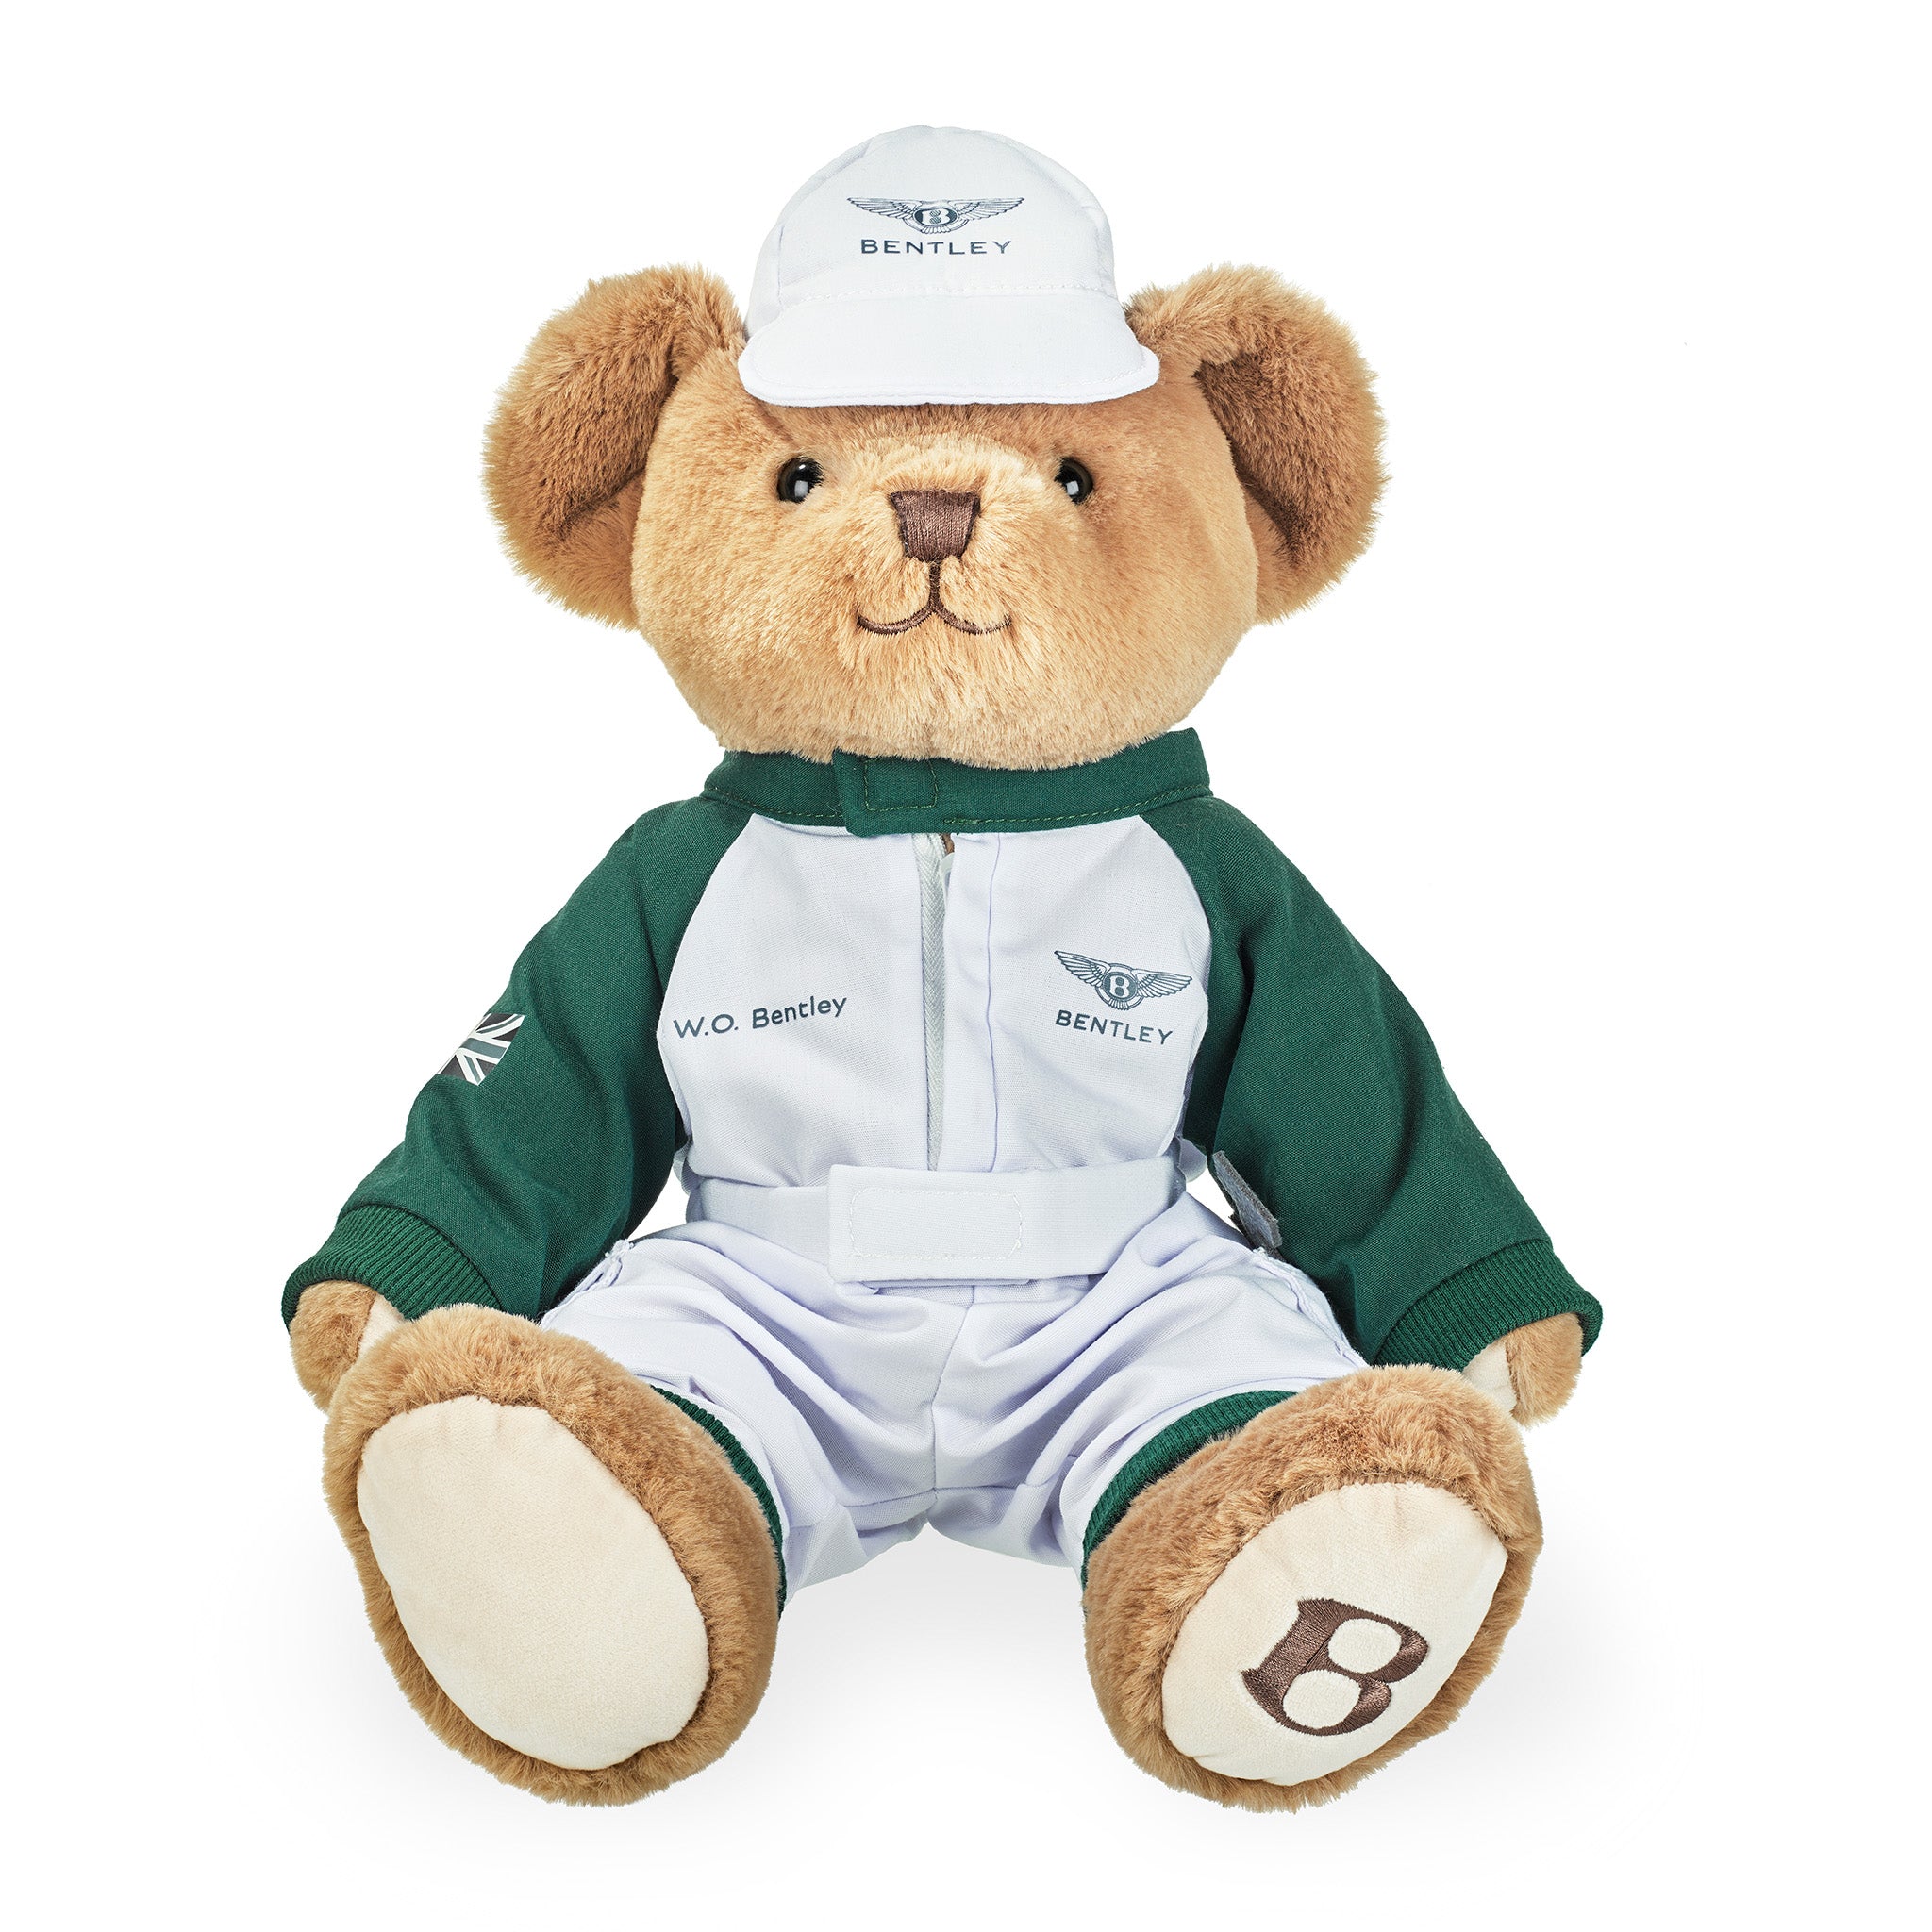 Engineer Bear – The Bentley Collection